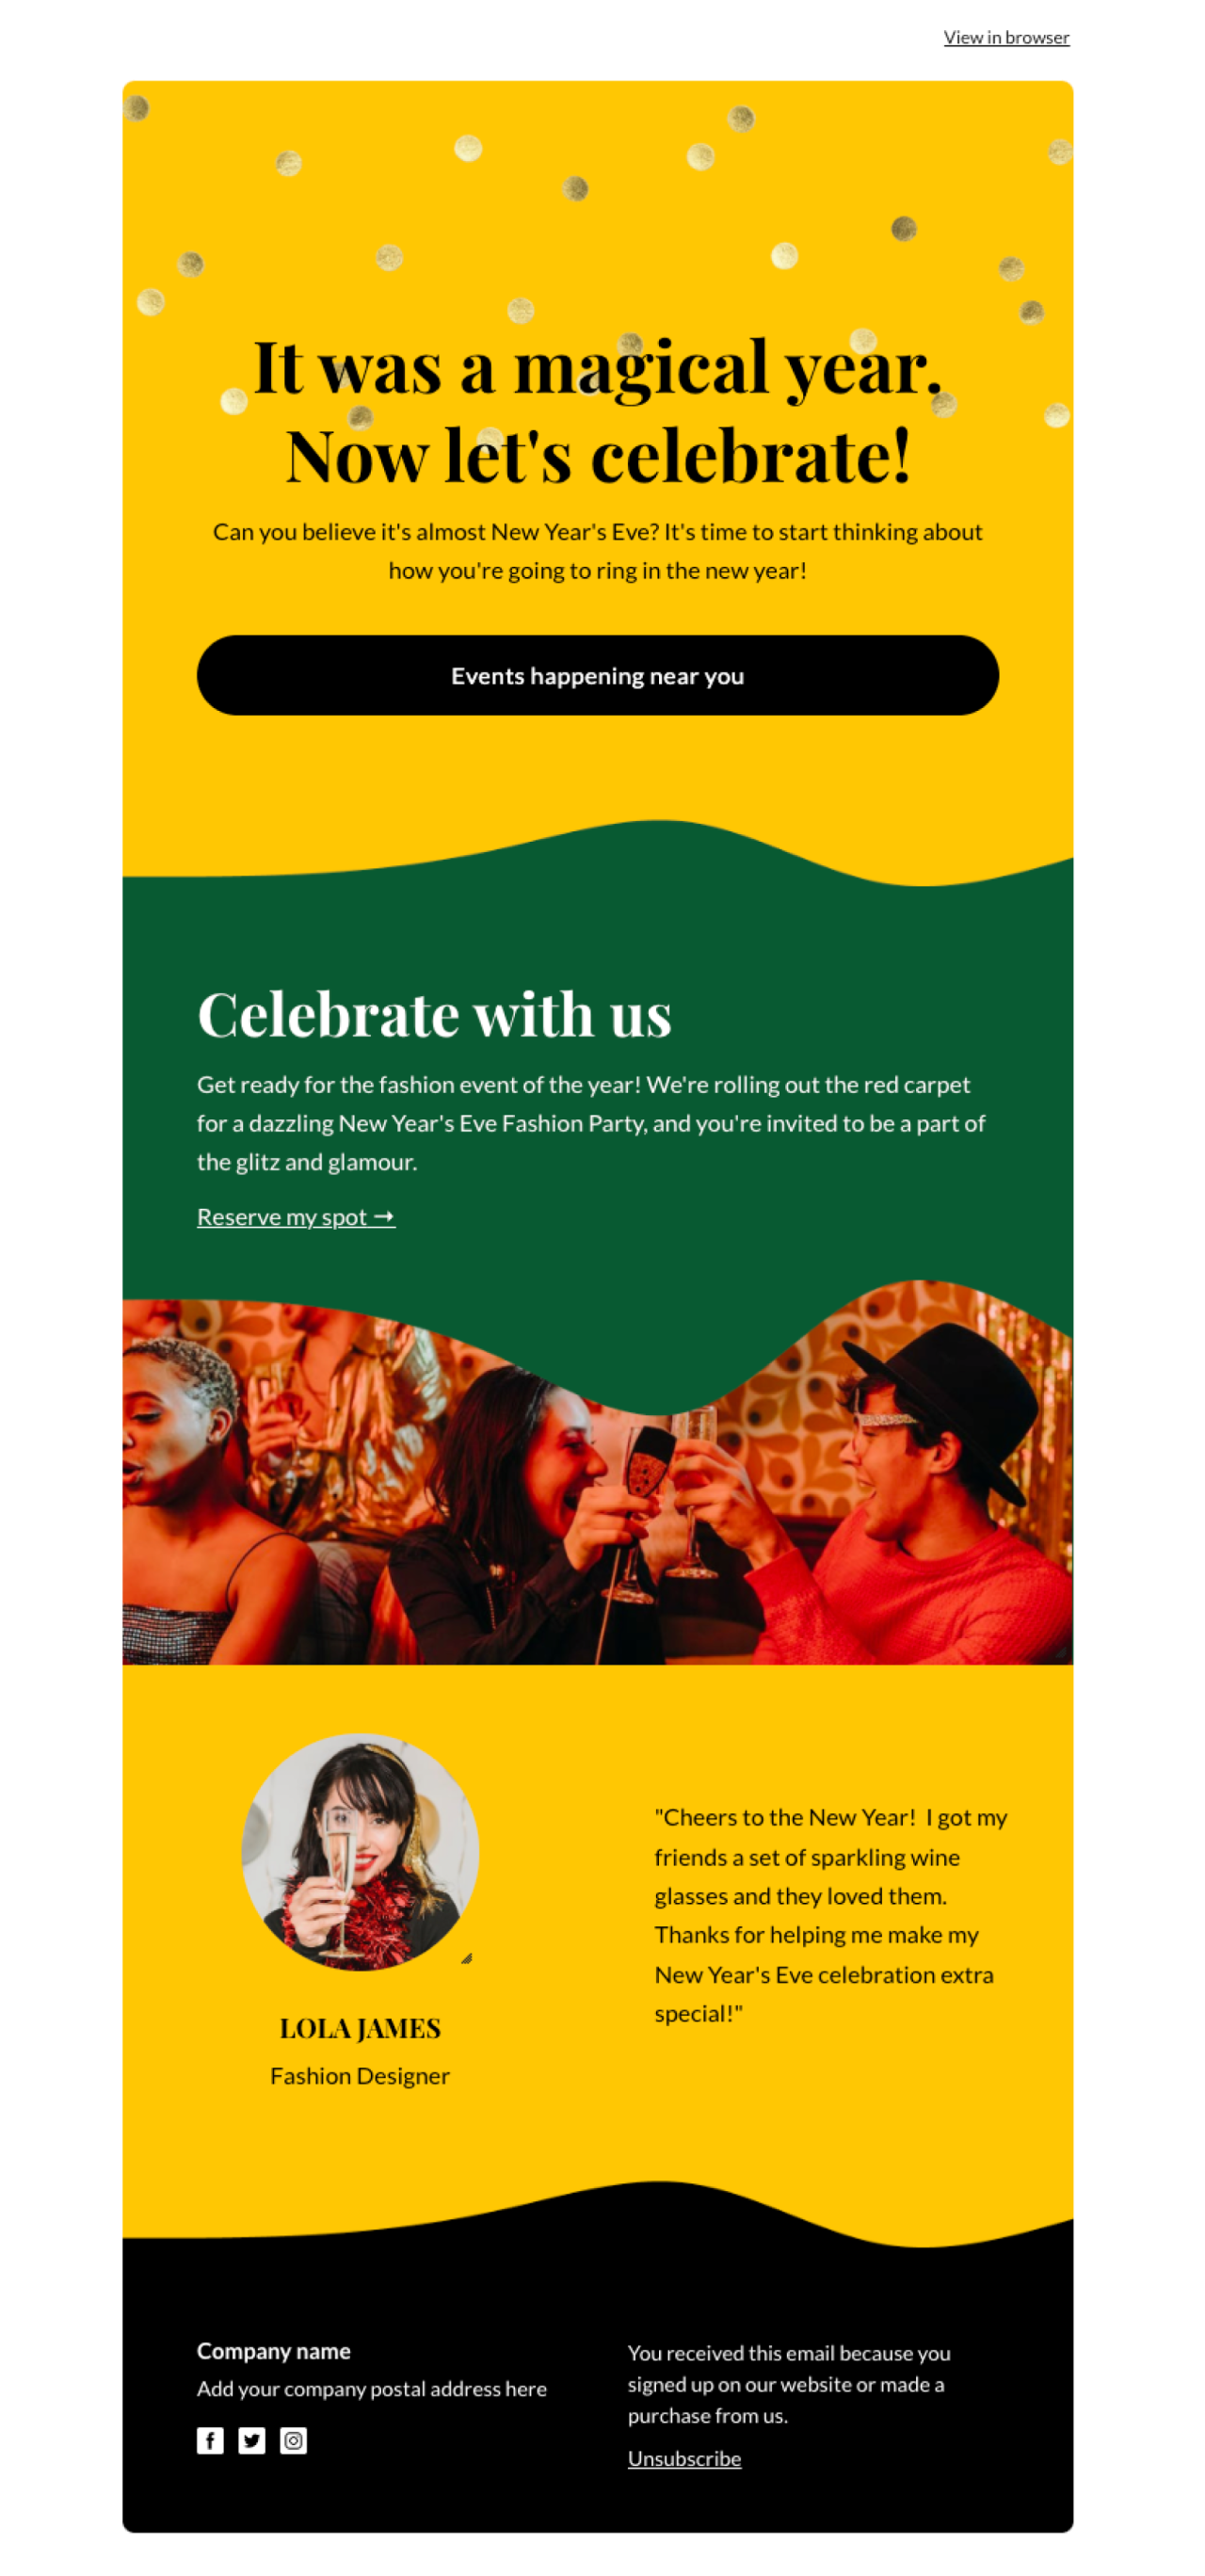 New year celebration template - Made by MailerLite